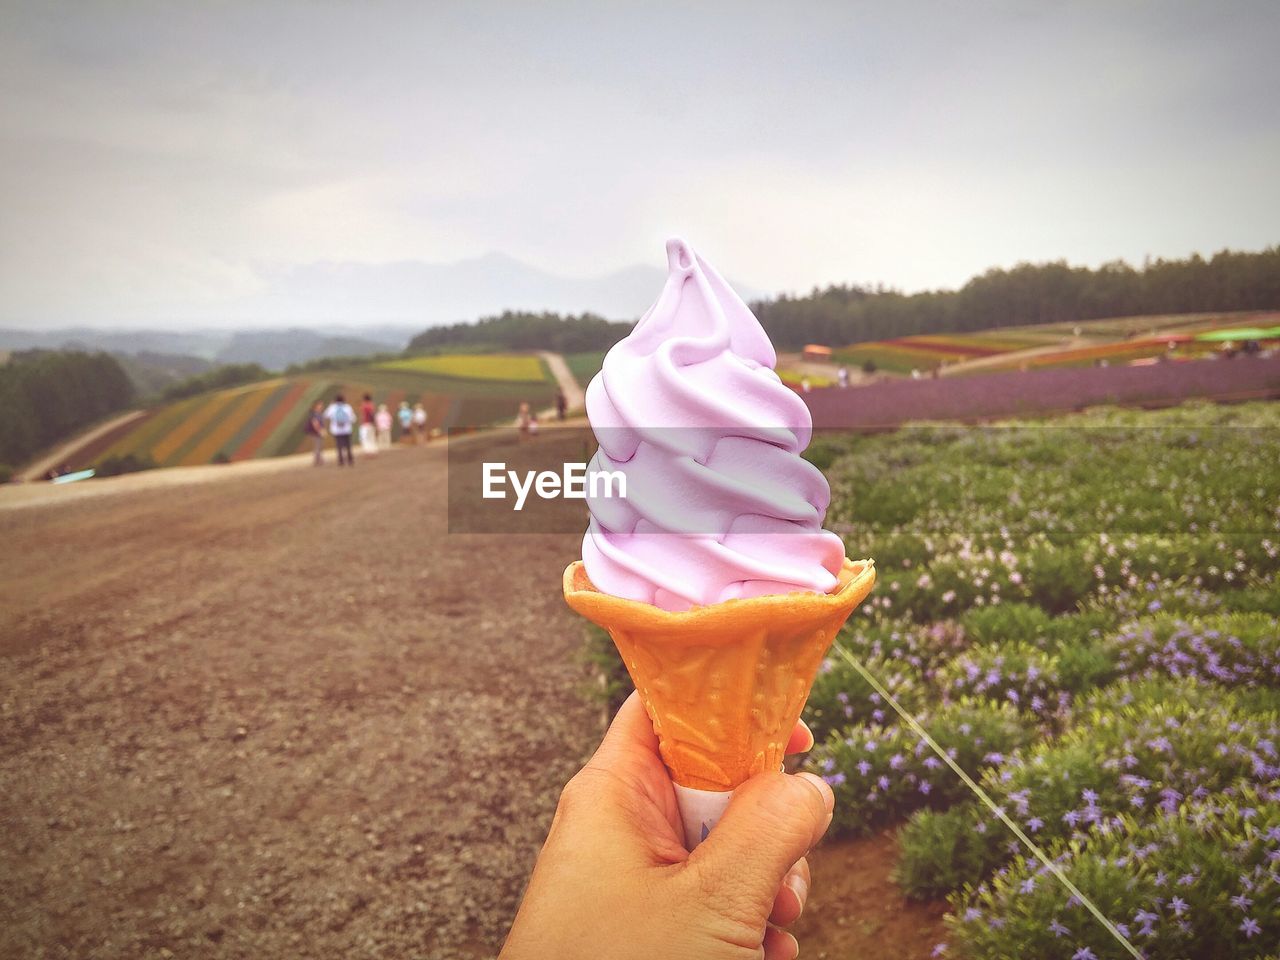 Cropped image of person holding ice cream on field